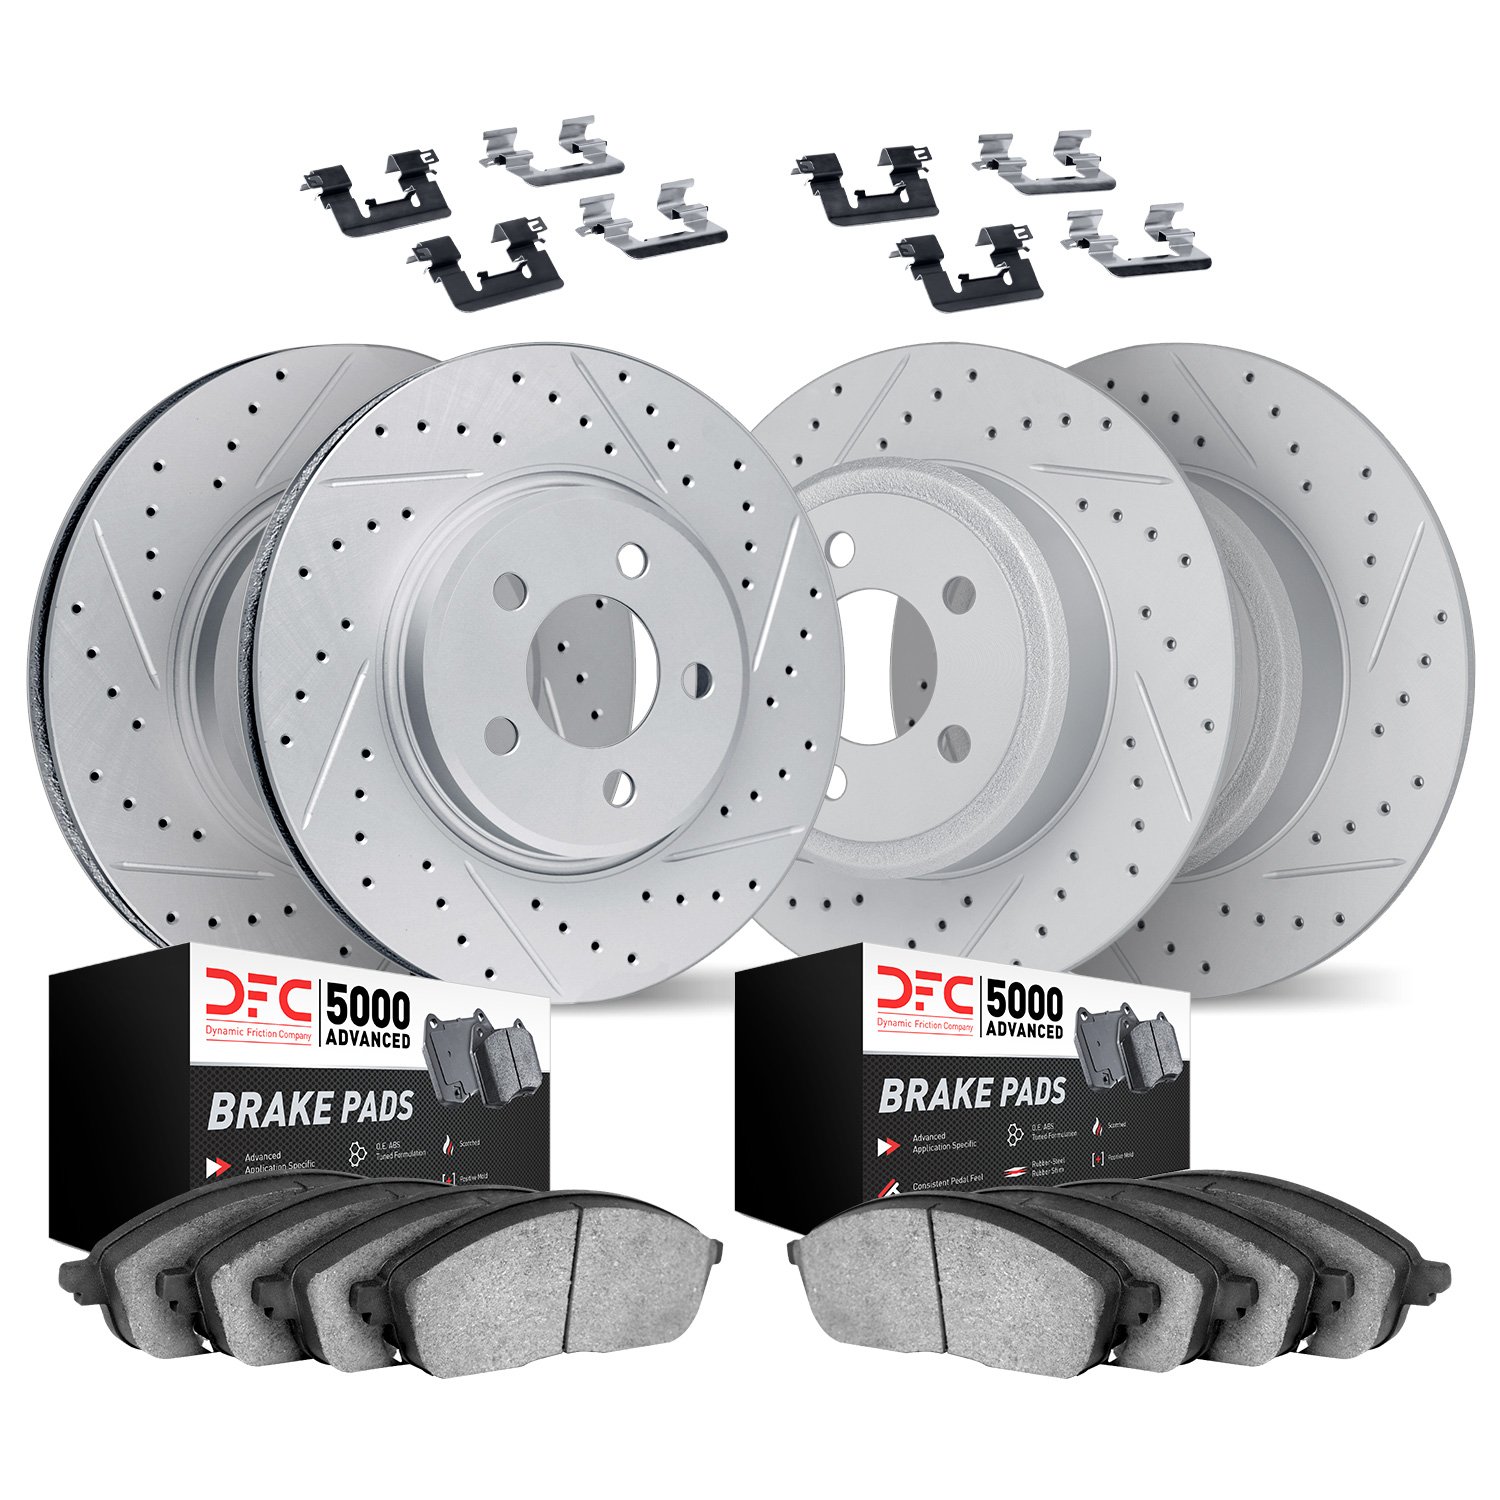 2514-59034 Geoperformance Drilled/Slotted Rotors w/5000 Advanced Brake Pads Kit & Hardware, 2016-2016 Acura/Honda, Position: Fro